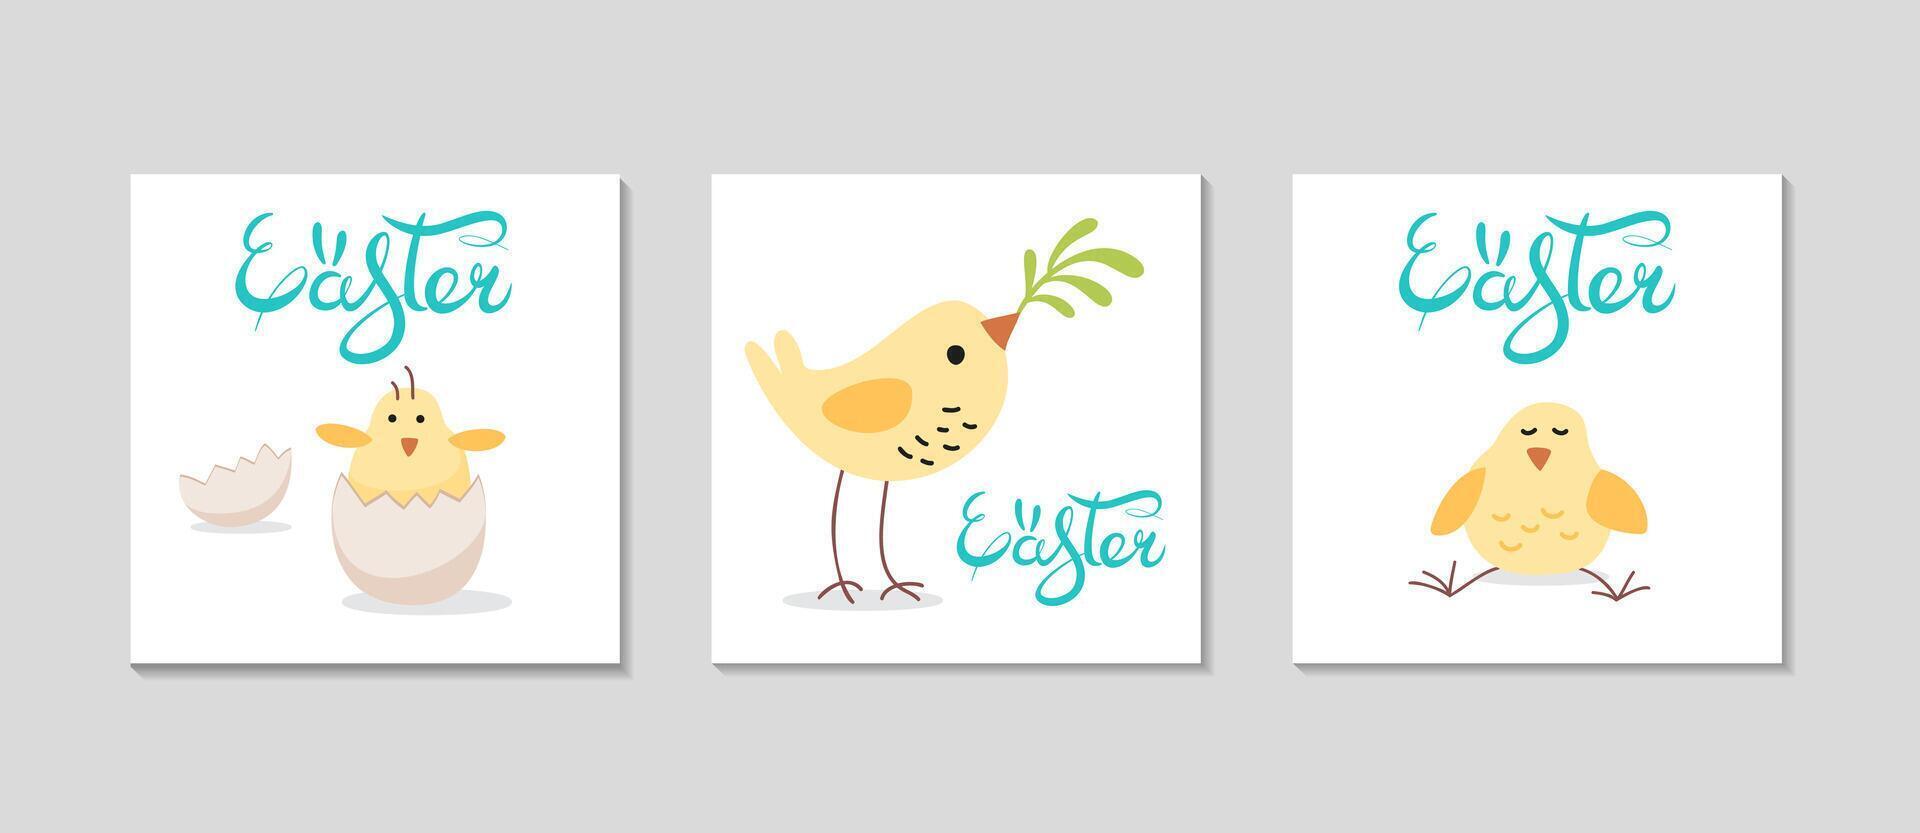 Easter simple cards set. Greeting square background for Social media. Holidays spring invitation. Little Easter birds. Cute yellow chickens, lettering. Vector flat illustration.